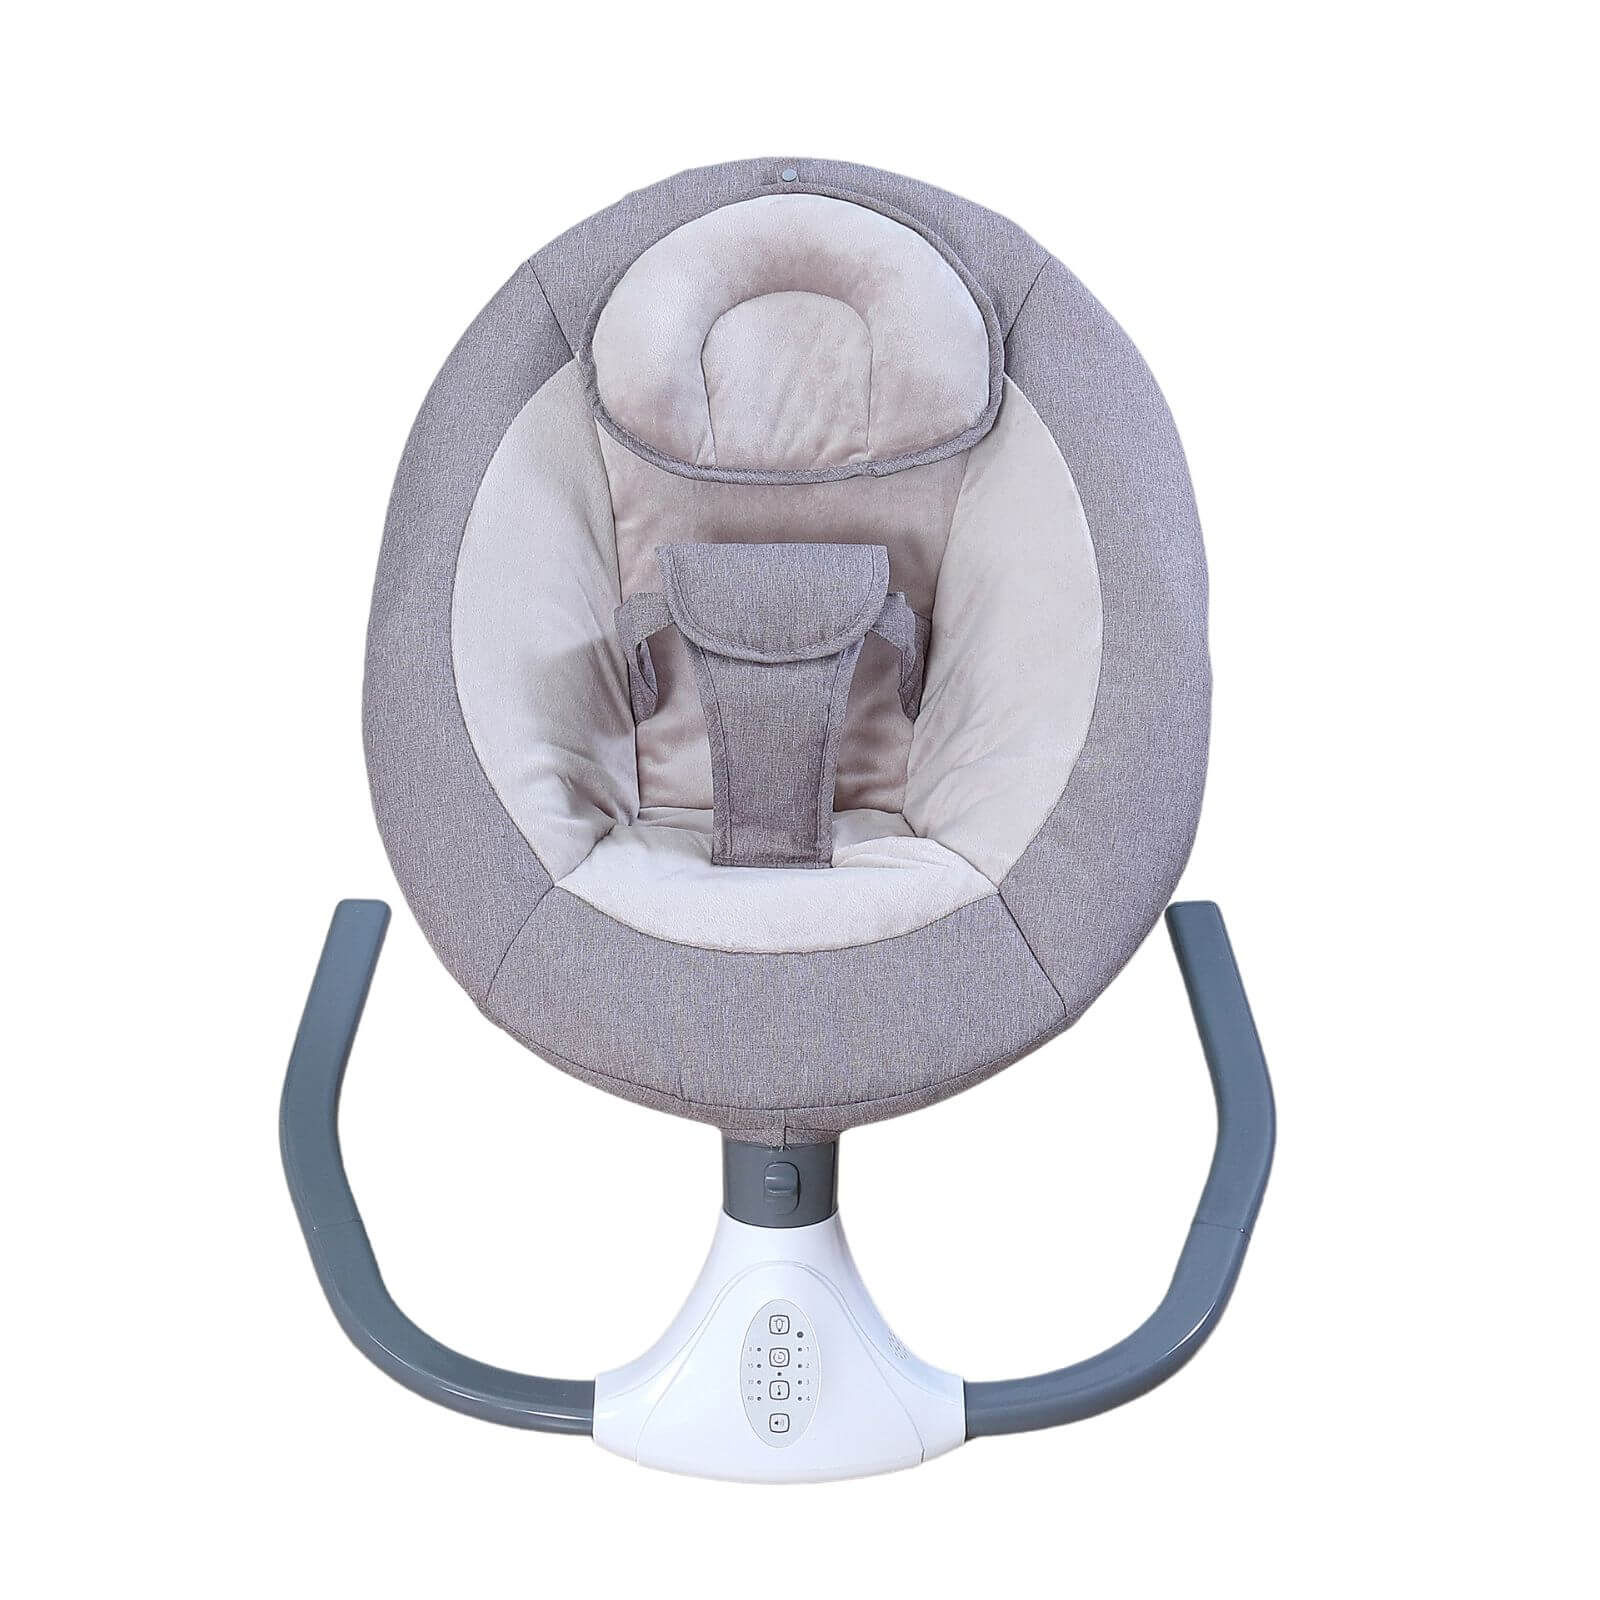 Smart Baby Swing Cradle Rocker Bed/ Bouncer Seat Infant Crib Remote Chair -Grey-4